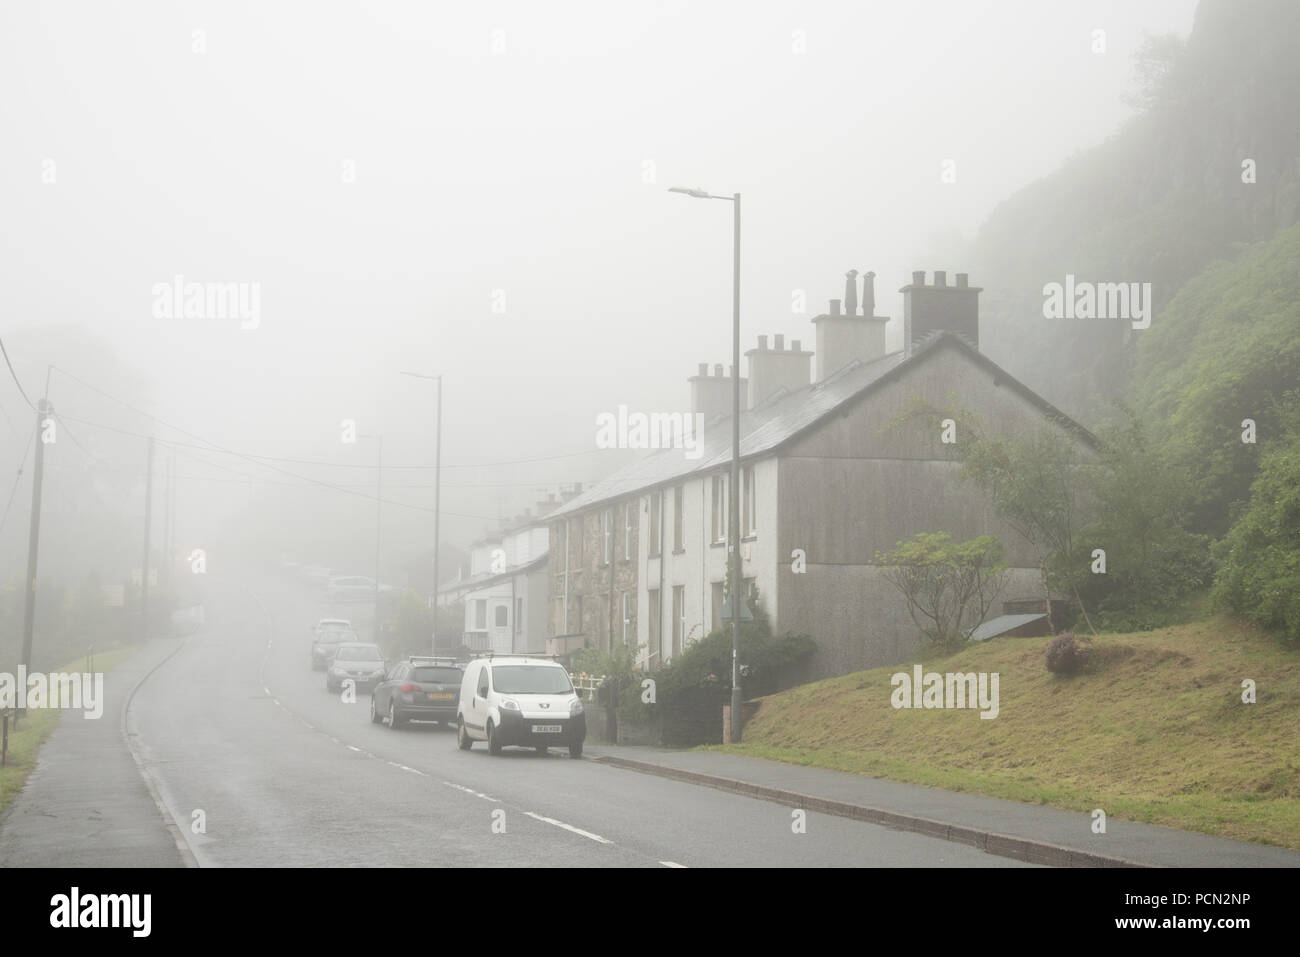 Blaenau Ffestiniog, Wales UK. 3rd August 2018. Despite much of the UK experiencing hot dry weather on 3rd August, Blaenau Ffestiniog, the town that once supplied the world with slate was shrouded in fog for much of the day. Credit: Richard Franklin/Alamy Live News Stock Photo